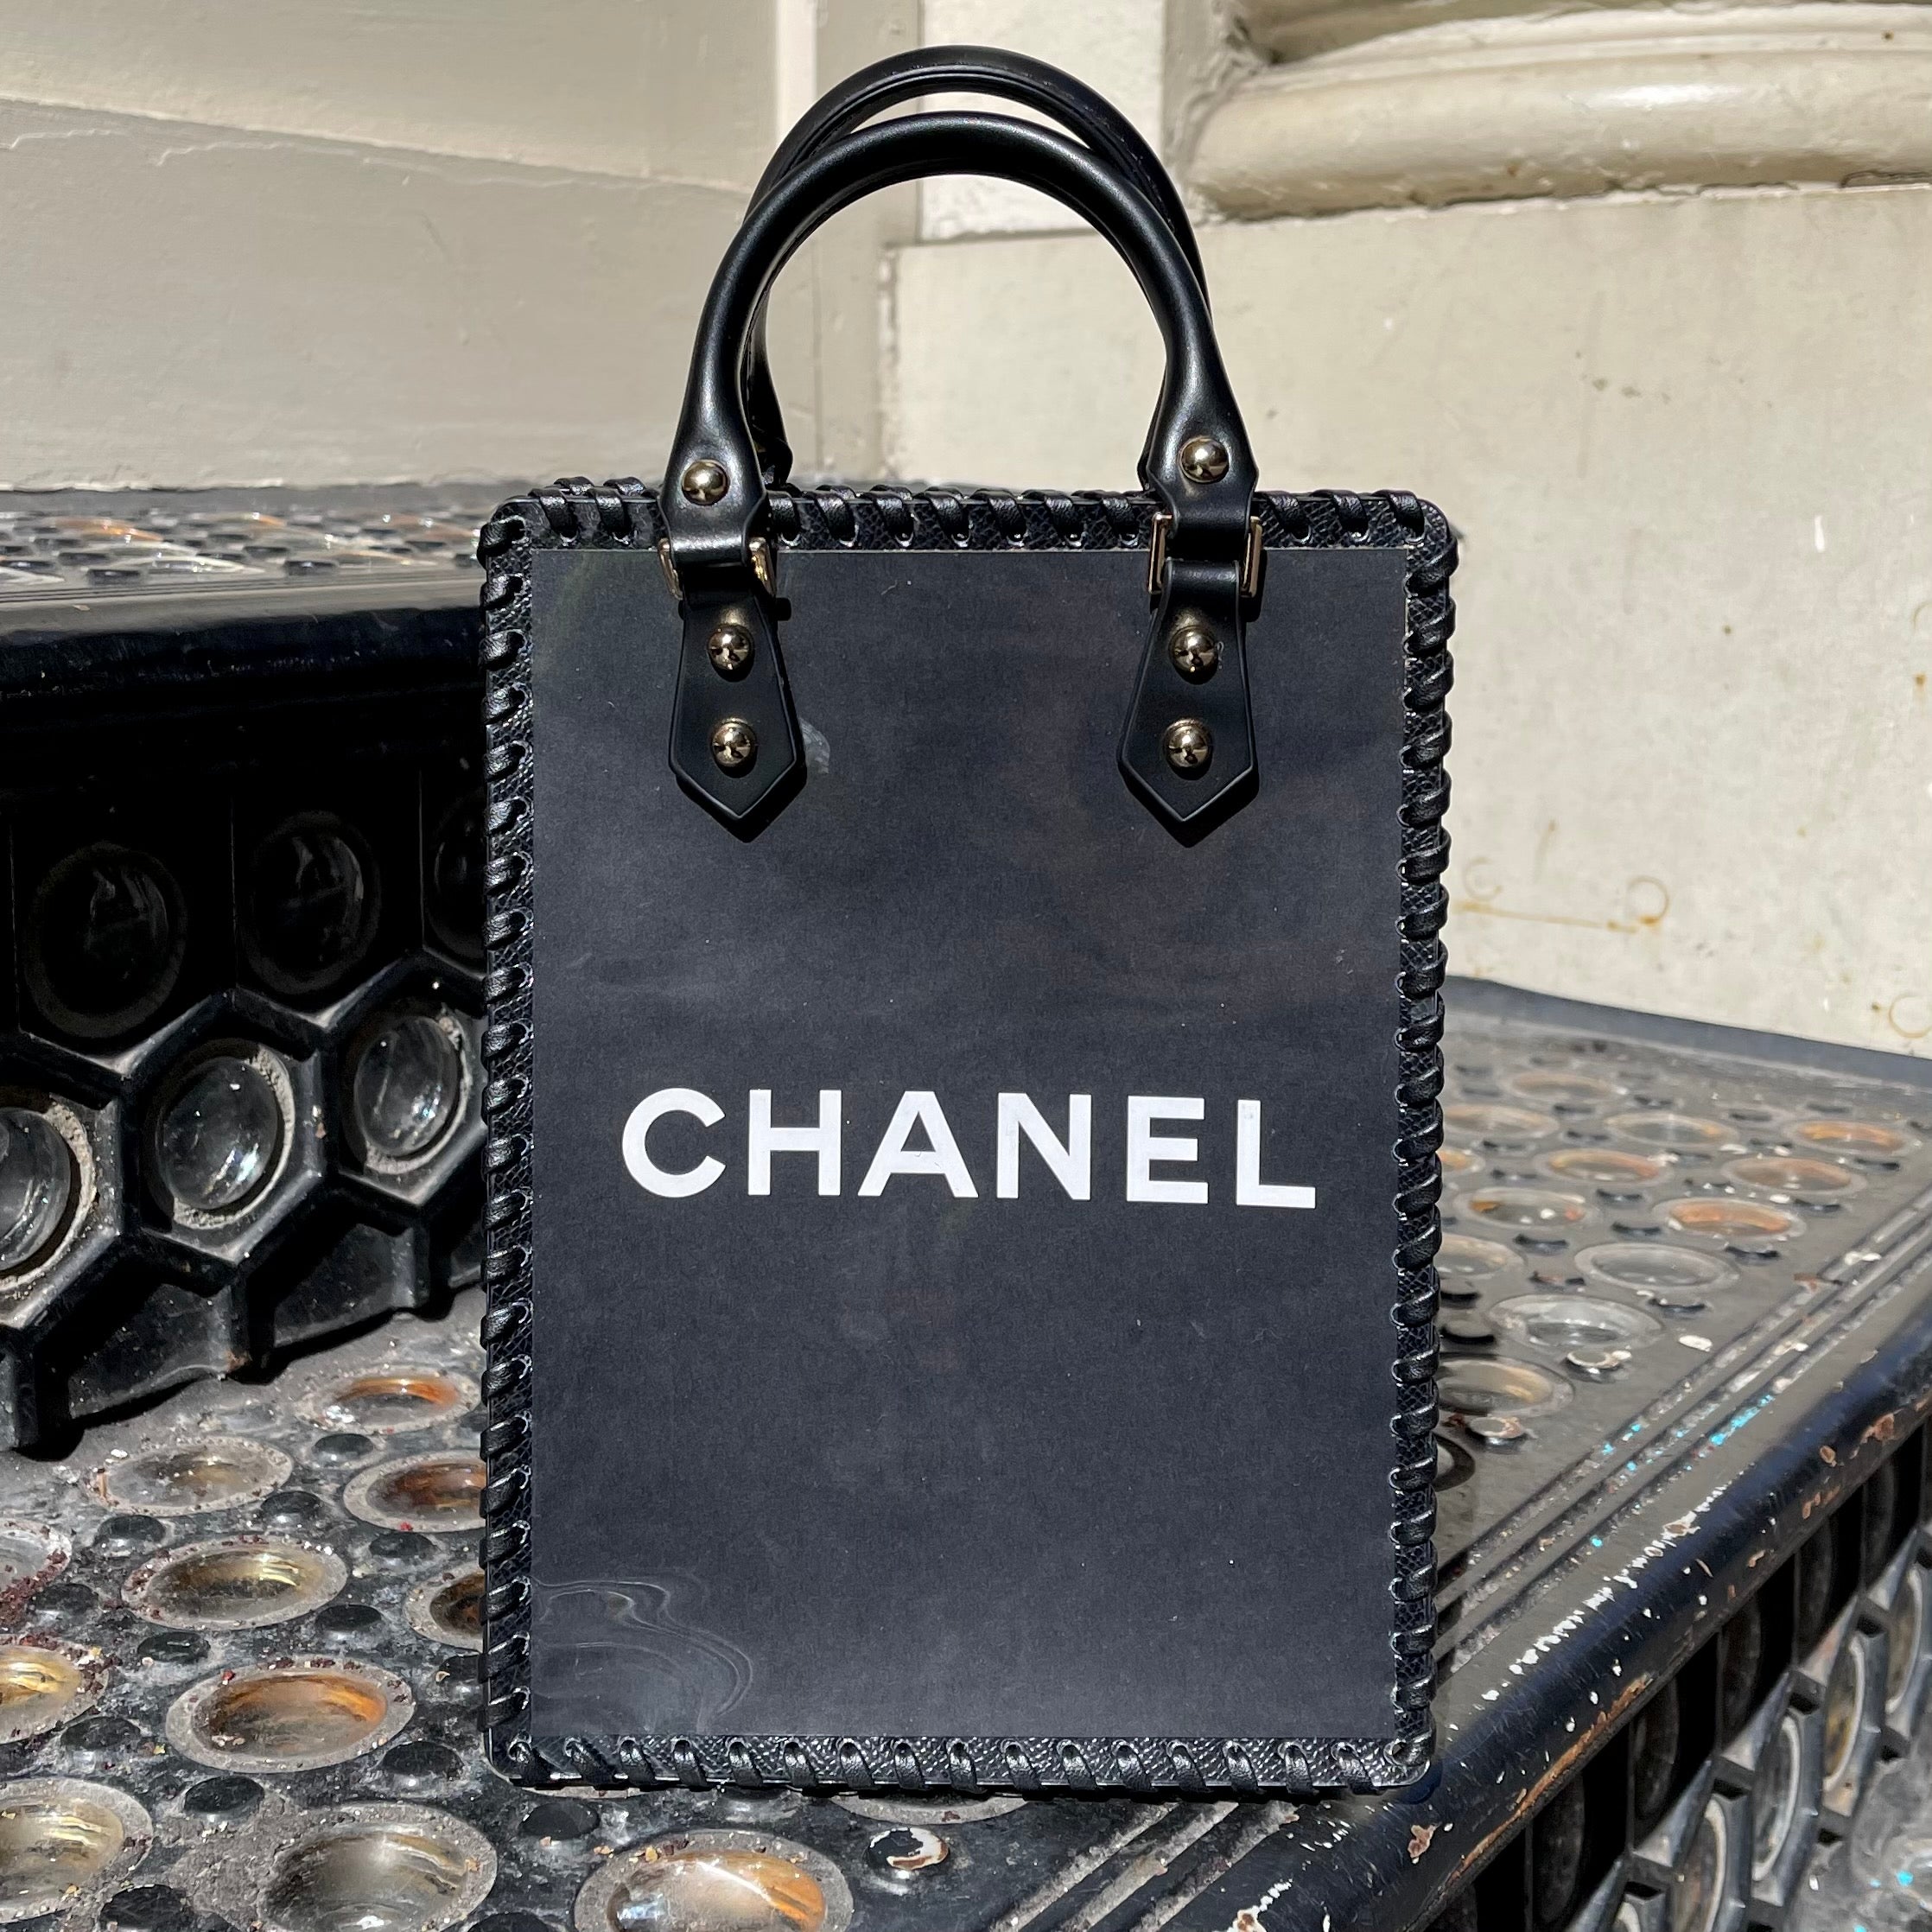 LCRestore.shop - Chanel up-cycle garment bag tote. Shop our collection on  www.Ladycuirrestore.com #upcycletote #chanel #chanelover #chanelforsale  #repurposed #sustainablefashion #sustainability #luxuryupcycling  #luxurysustainability #perfecttote